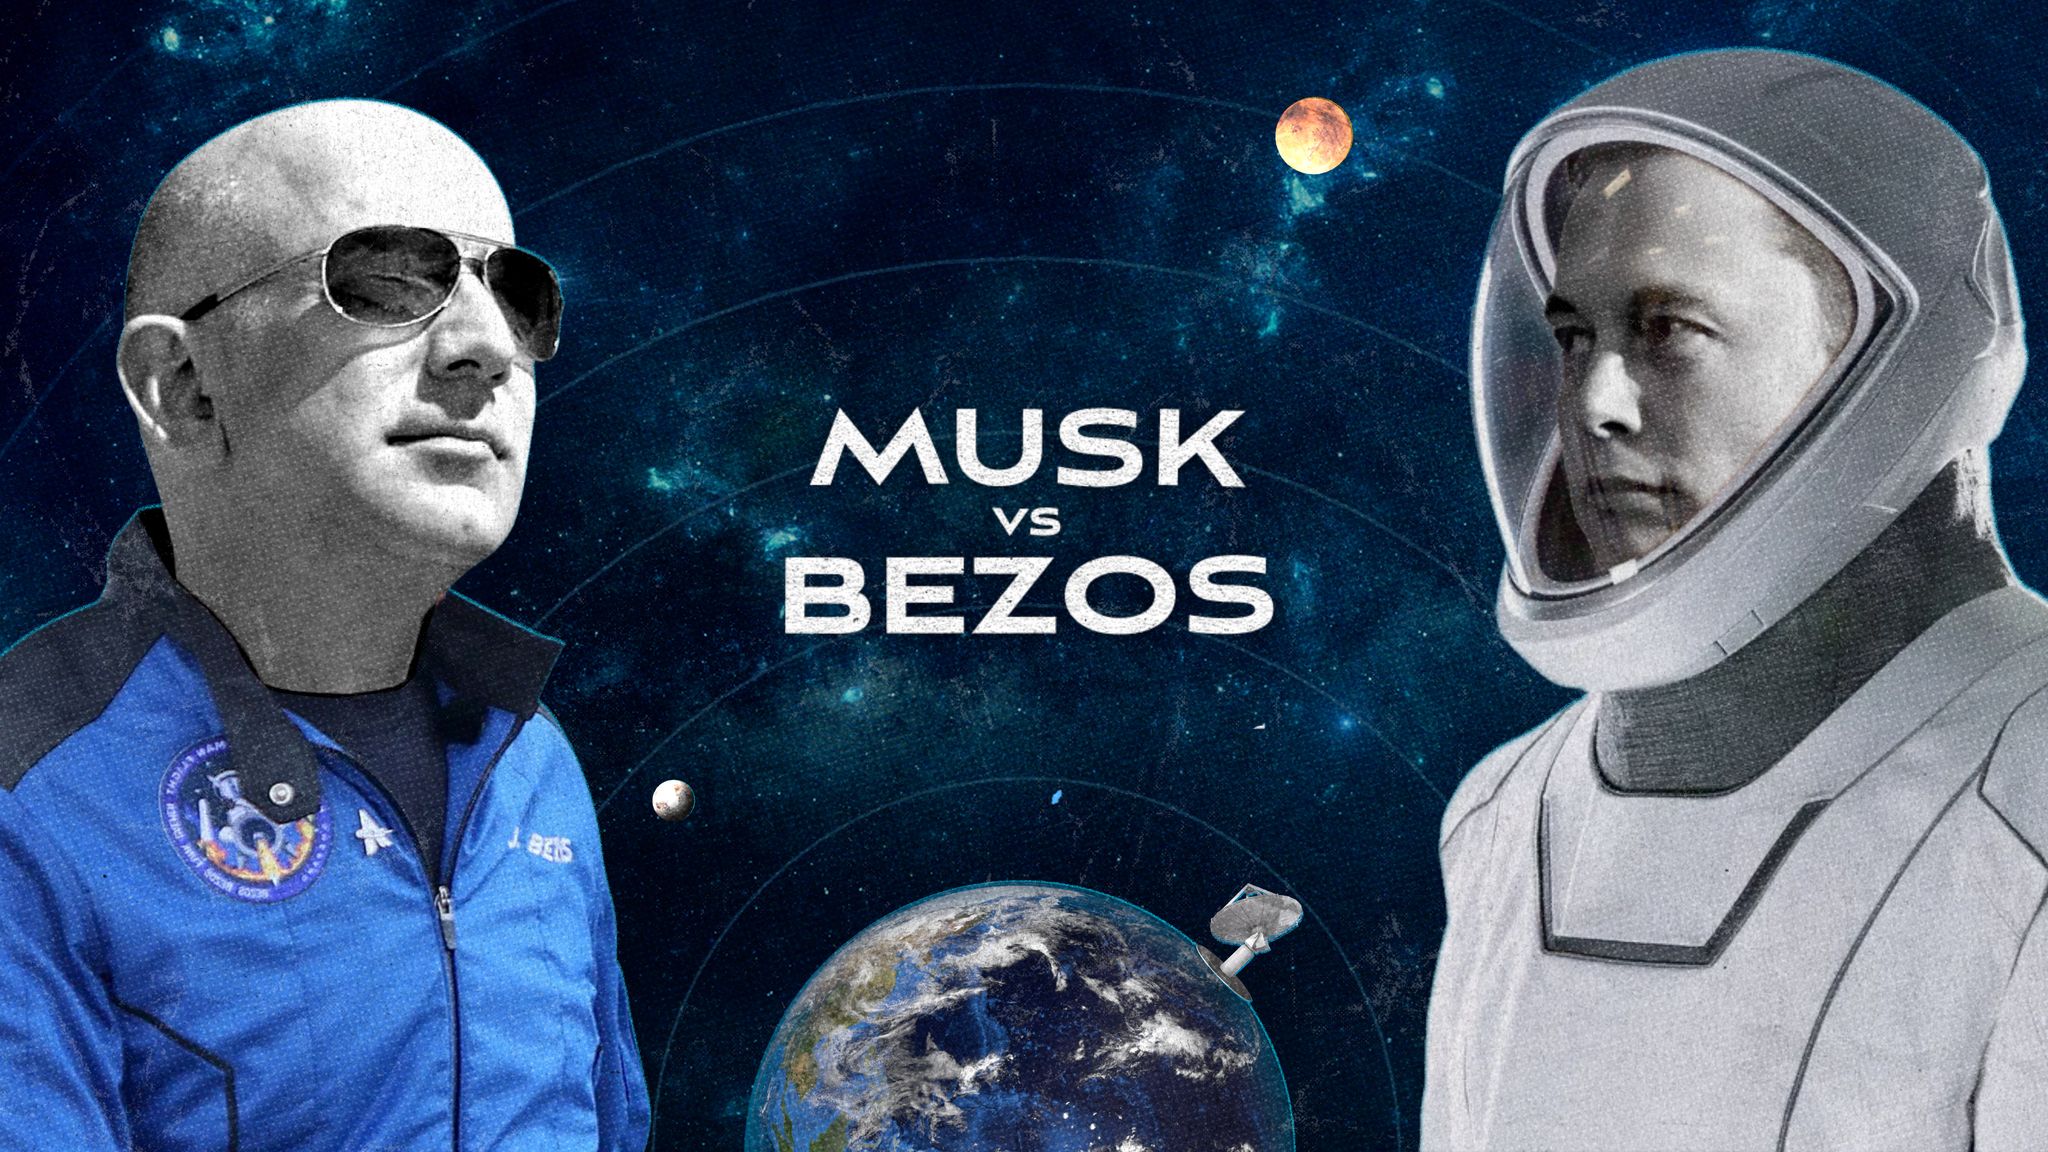 musk and bezos spaze wars poster